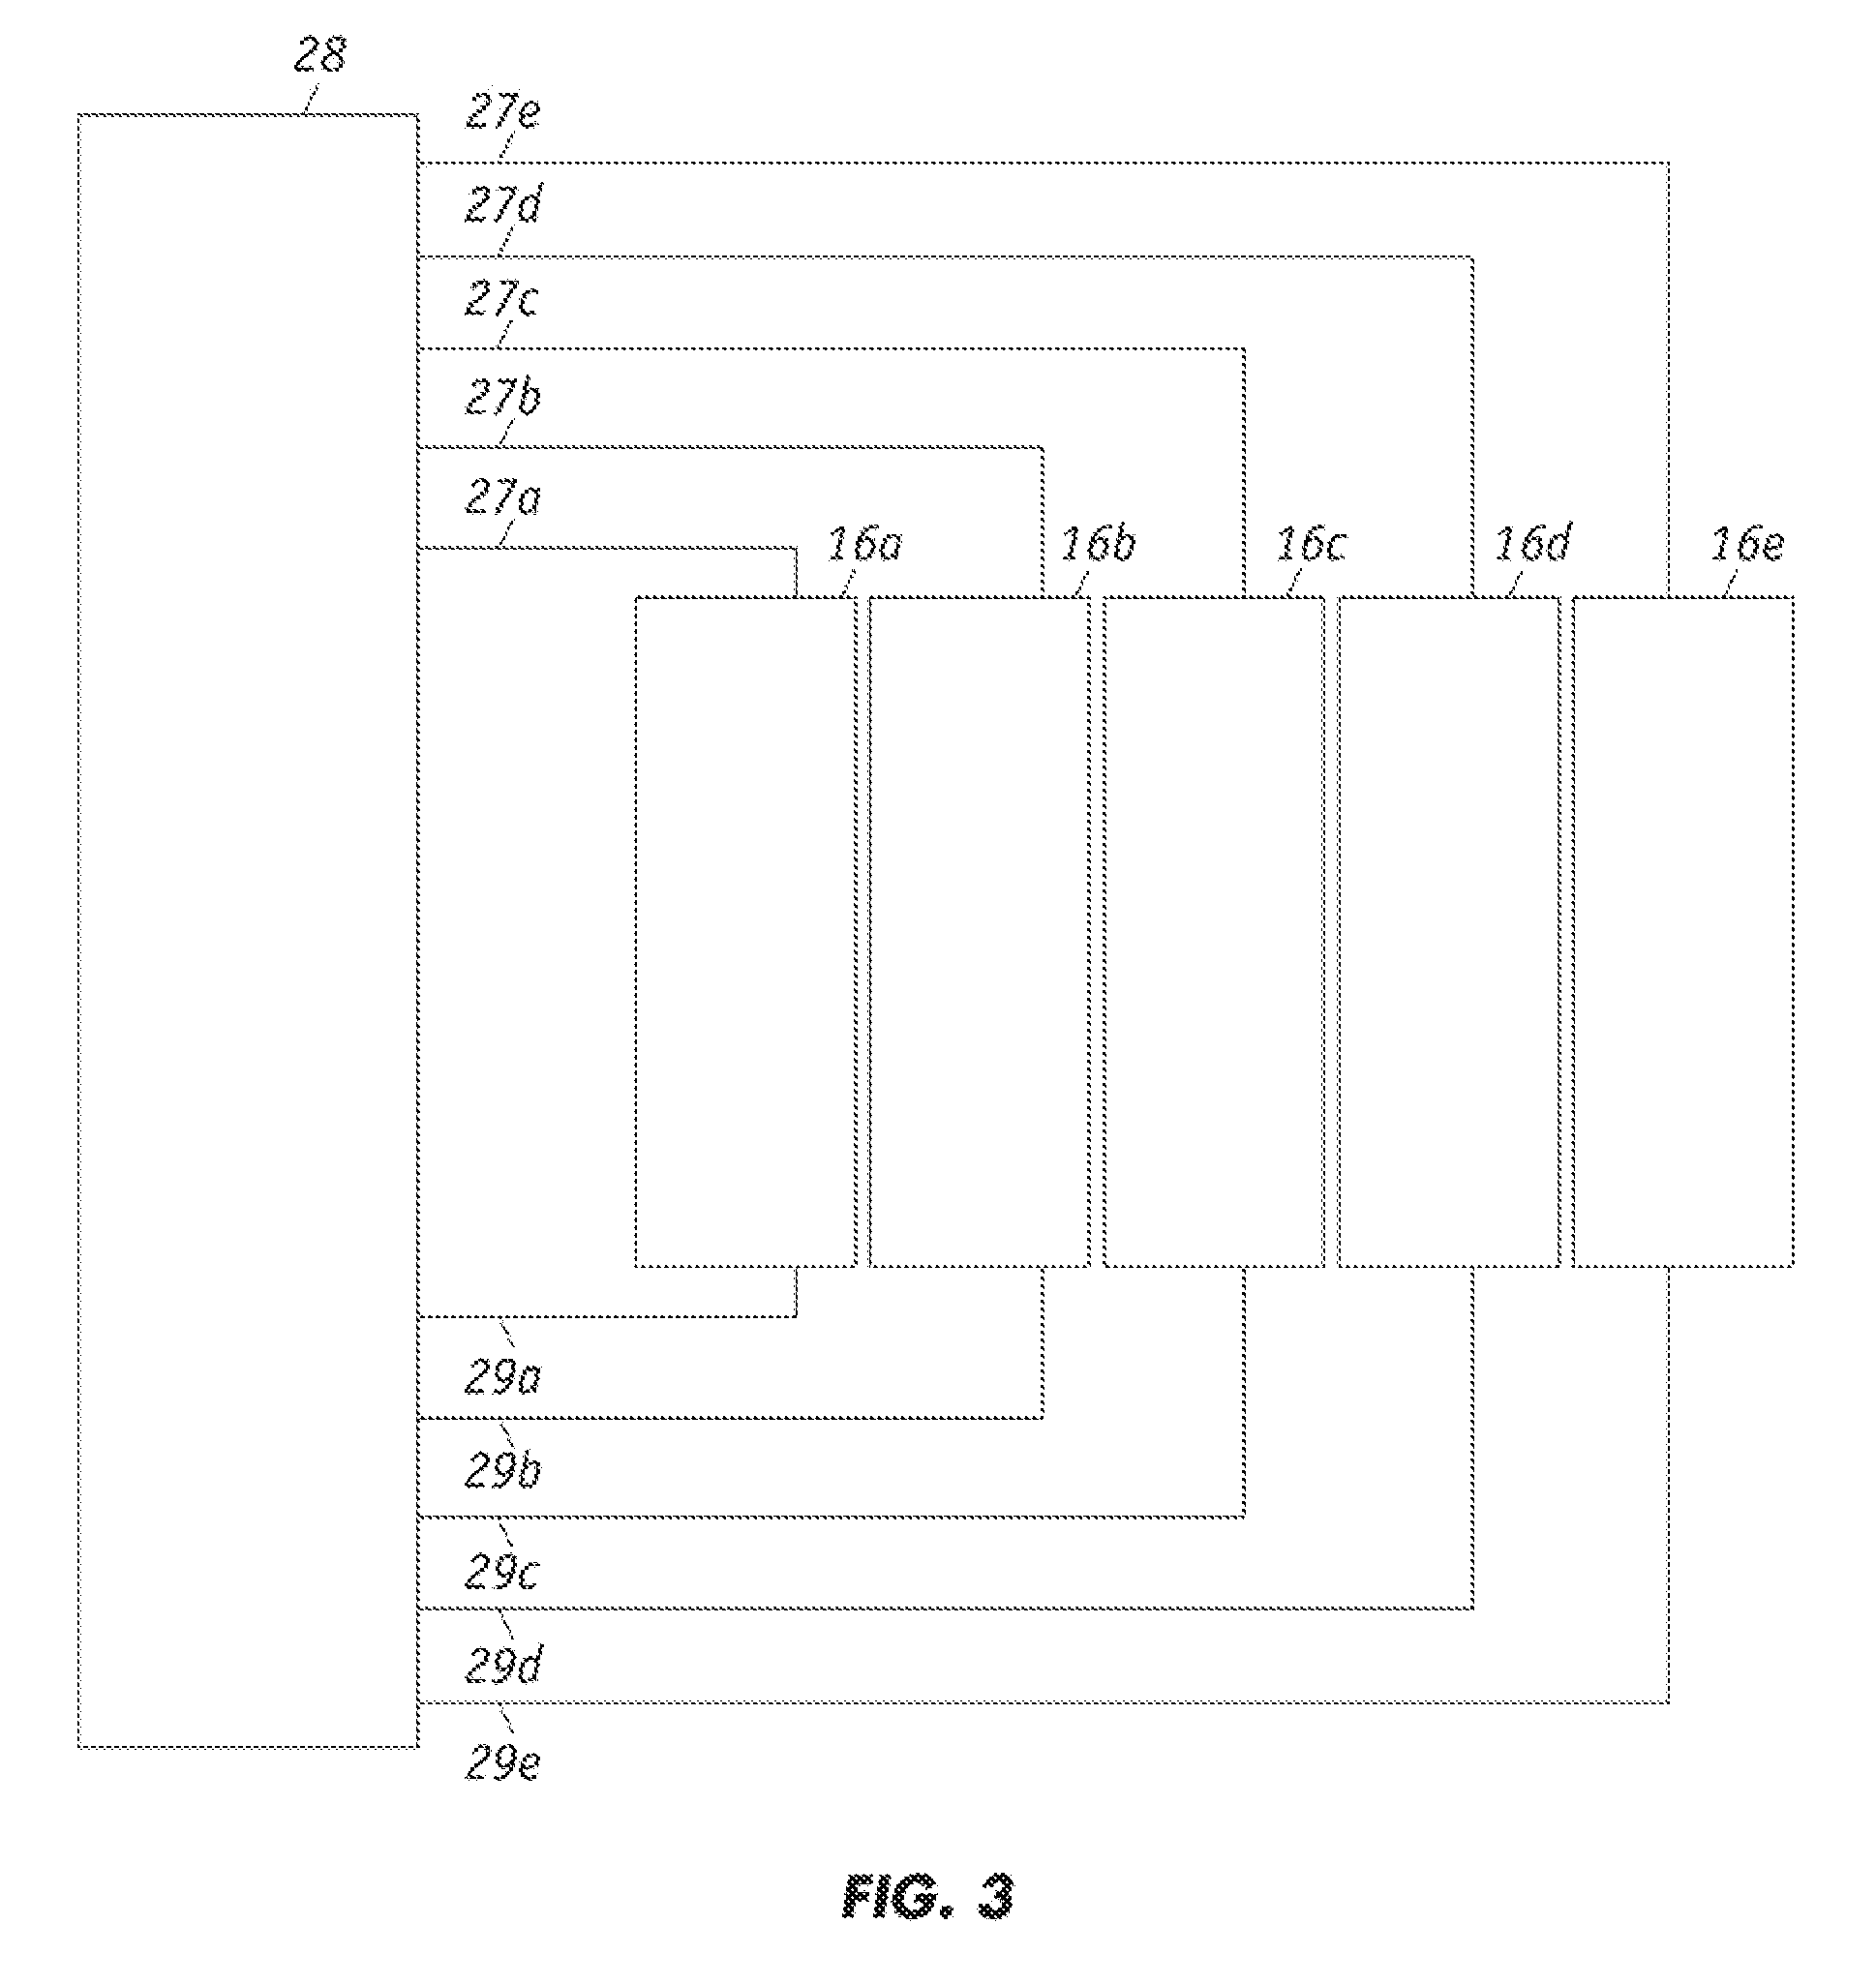 Method of Crosstalk Reduction for Multi-zone Induction Heating Systems